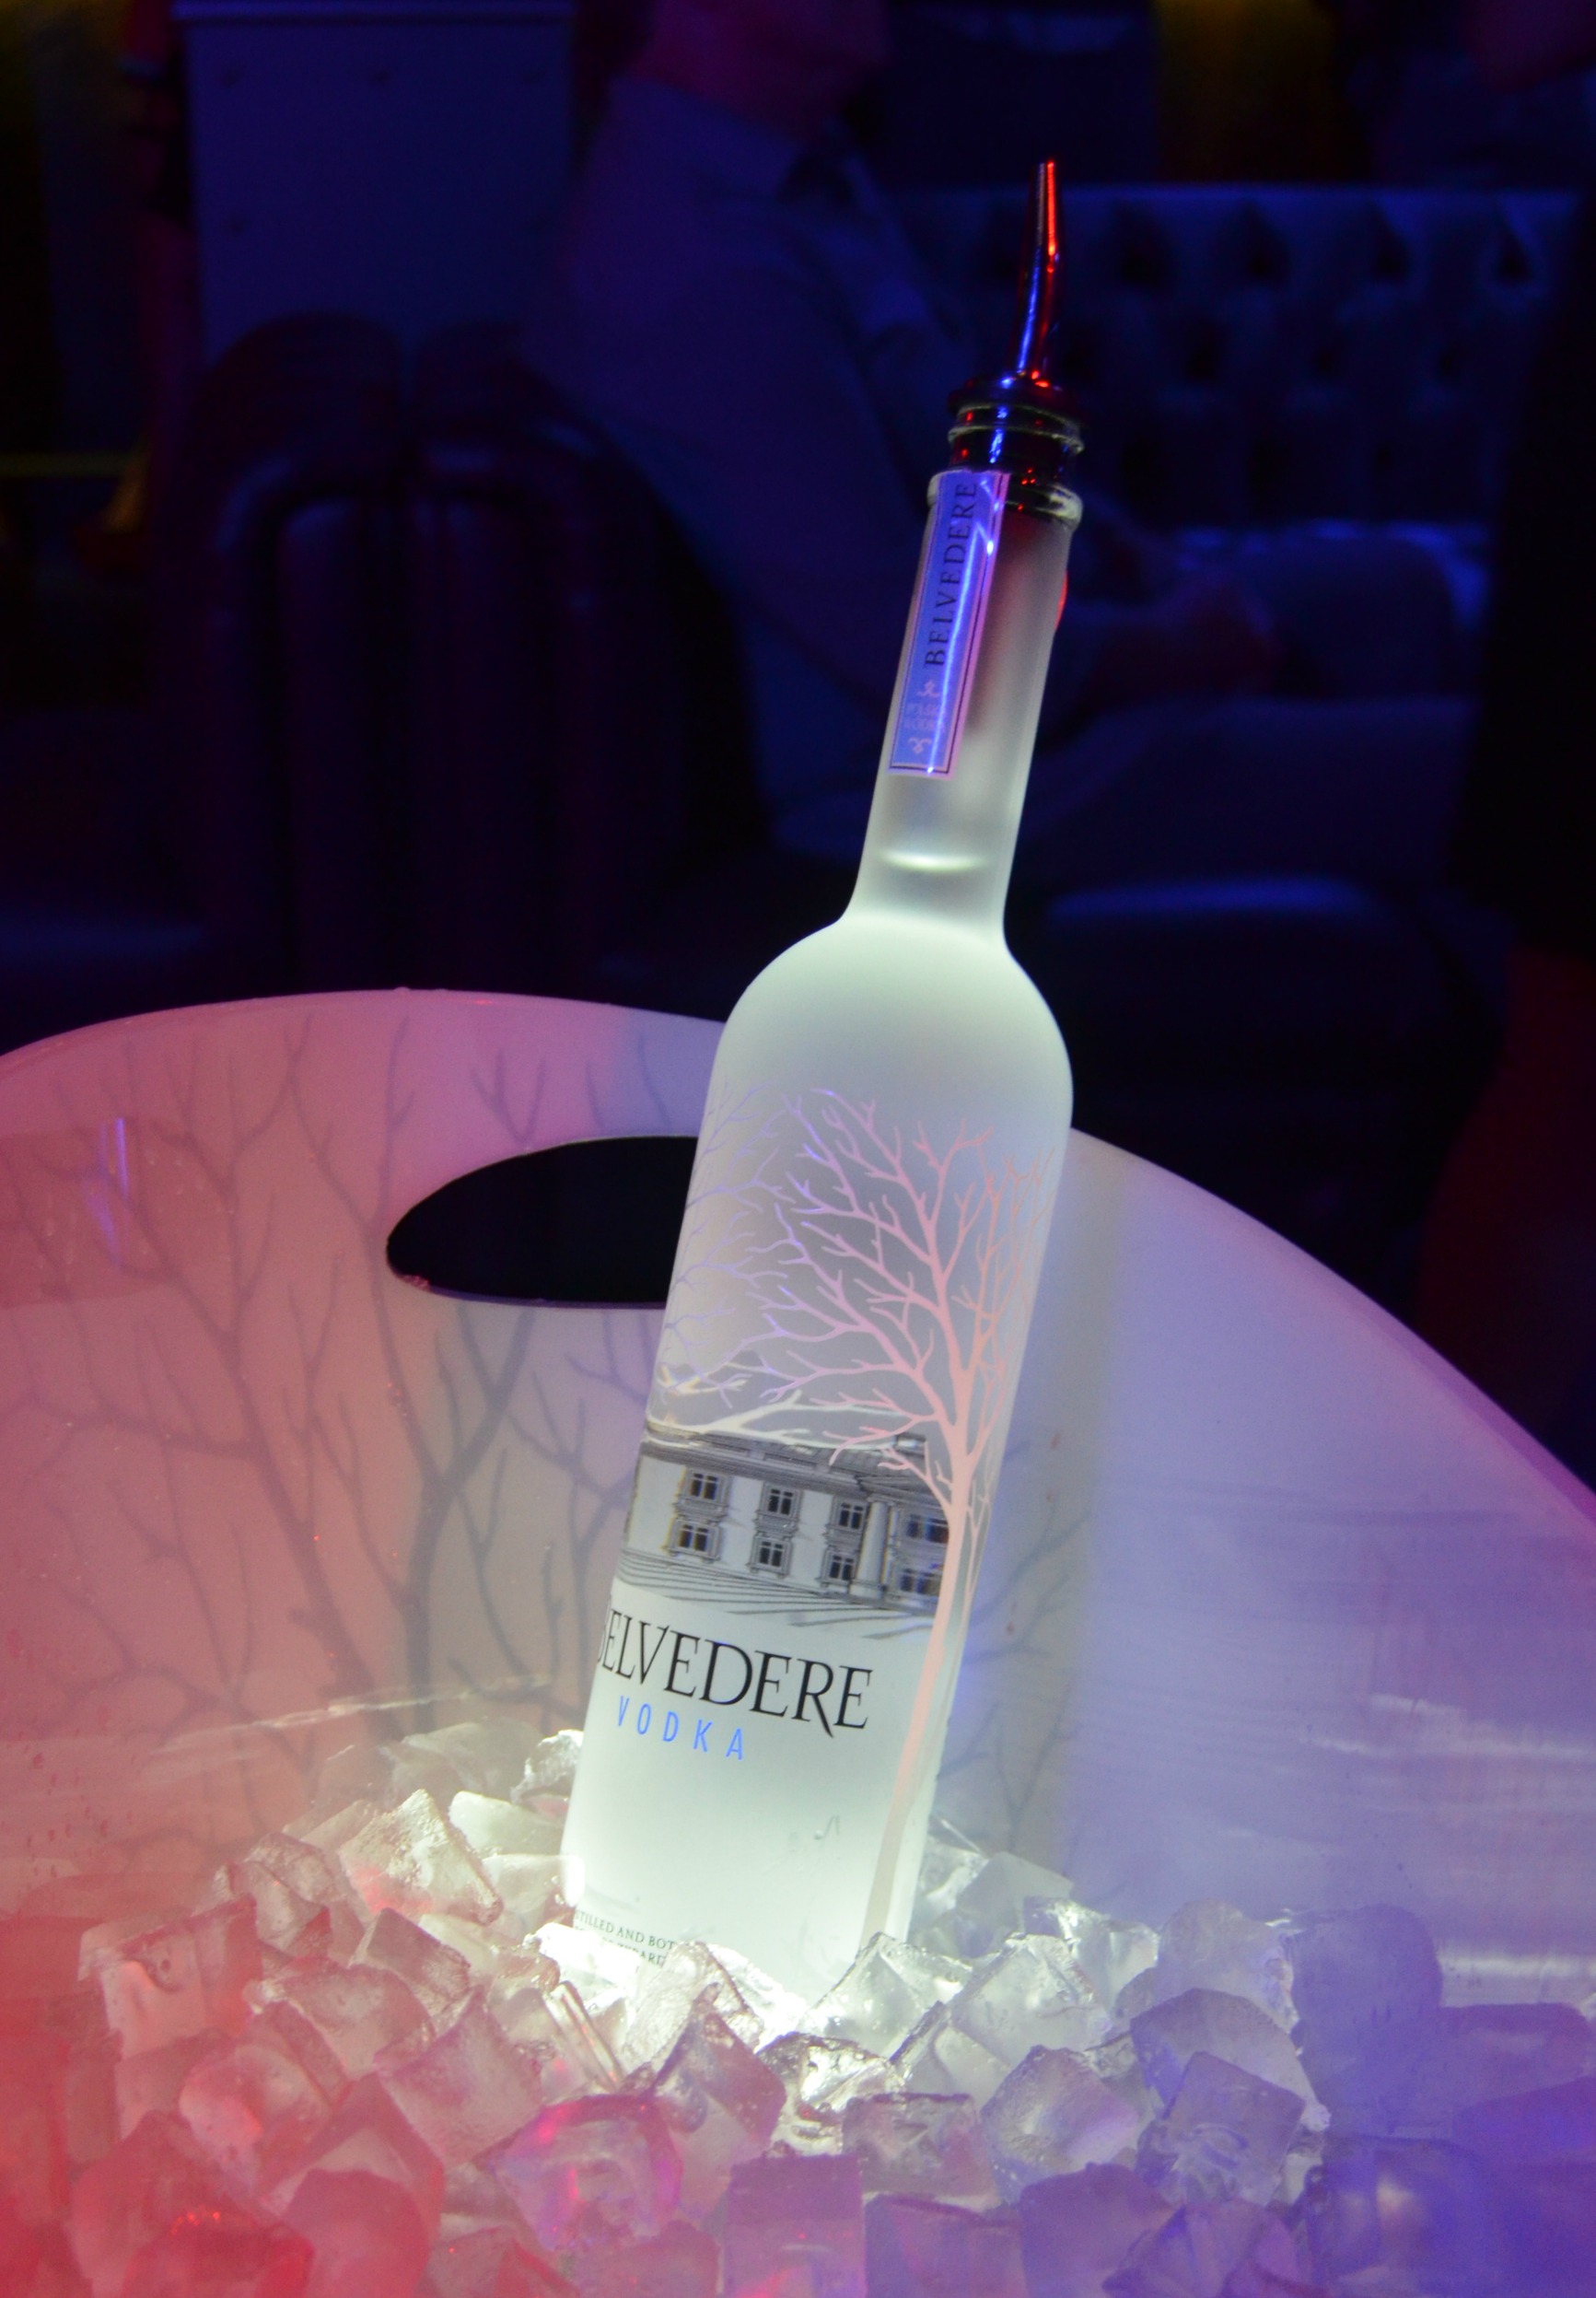 Party like a rockstar with Belvedere Vodka's brand new Midnight